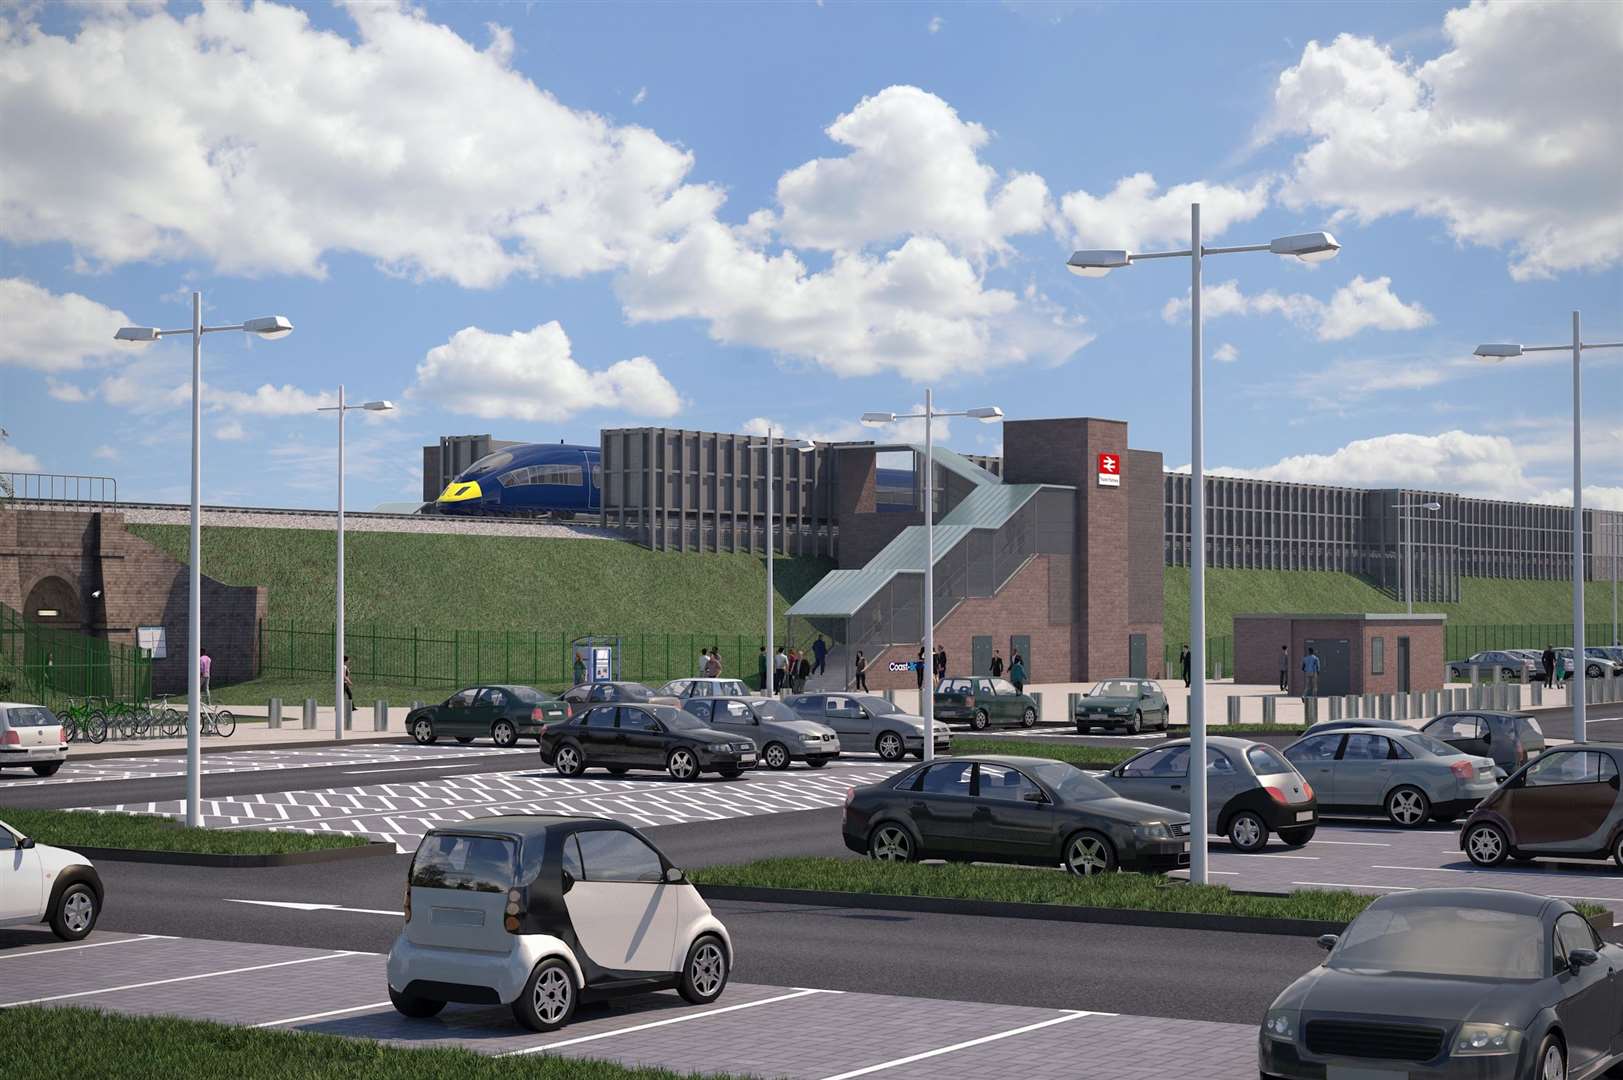 Thanet Parkway is due to open on July 31 - here pictured in CGI images prior to its construction